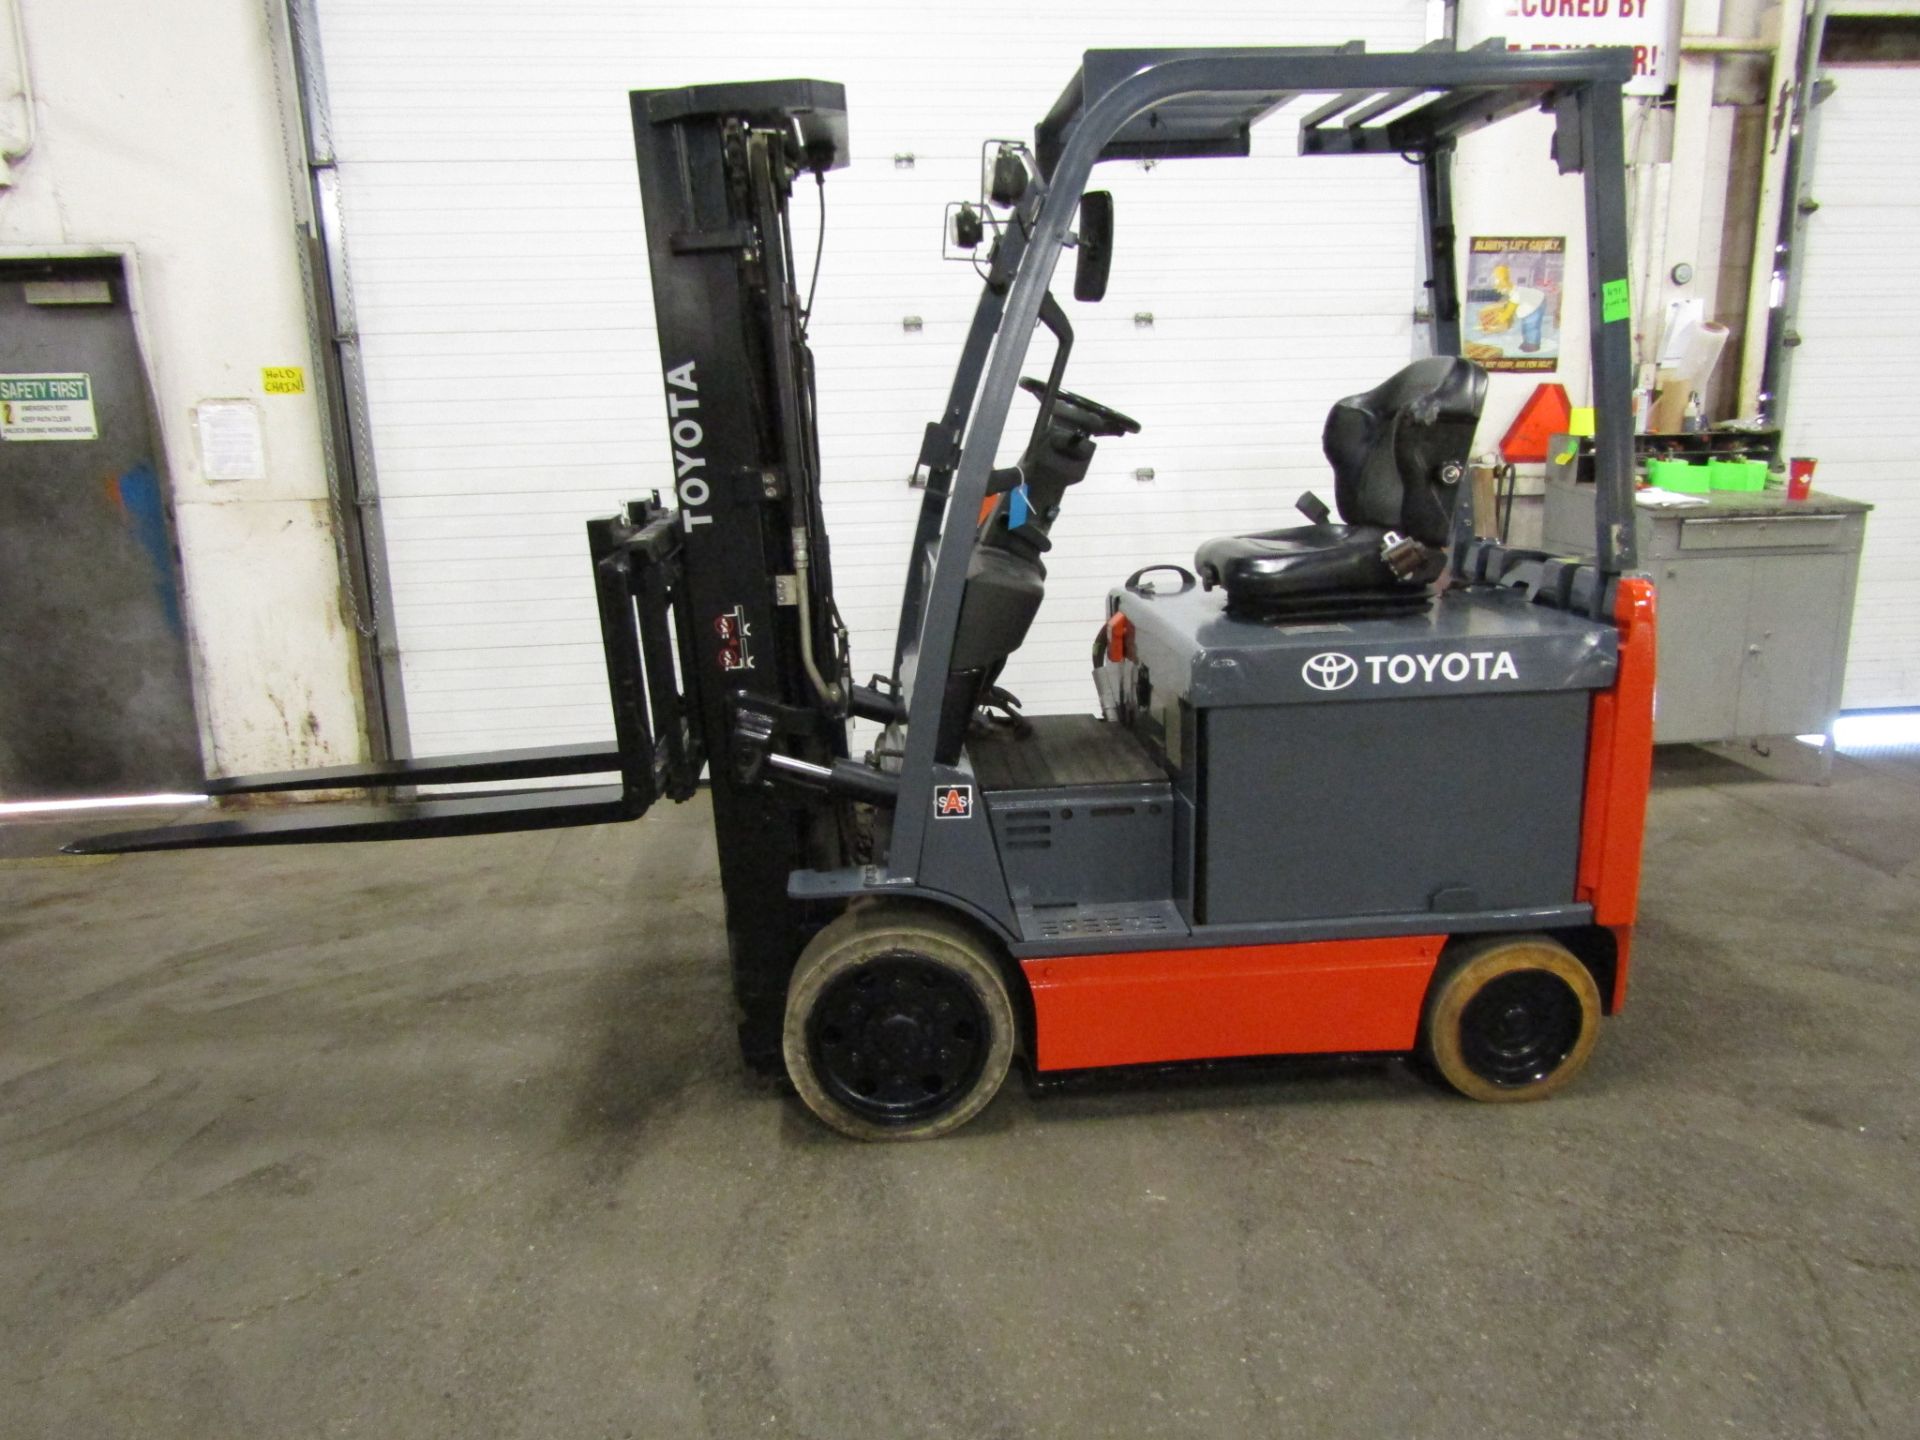 FREE CUSTOMS DOCS & 0 DUTY FEES - Toyota 5500lbs Electric Forklift with sideshift and 3-stage mast